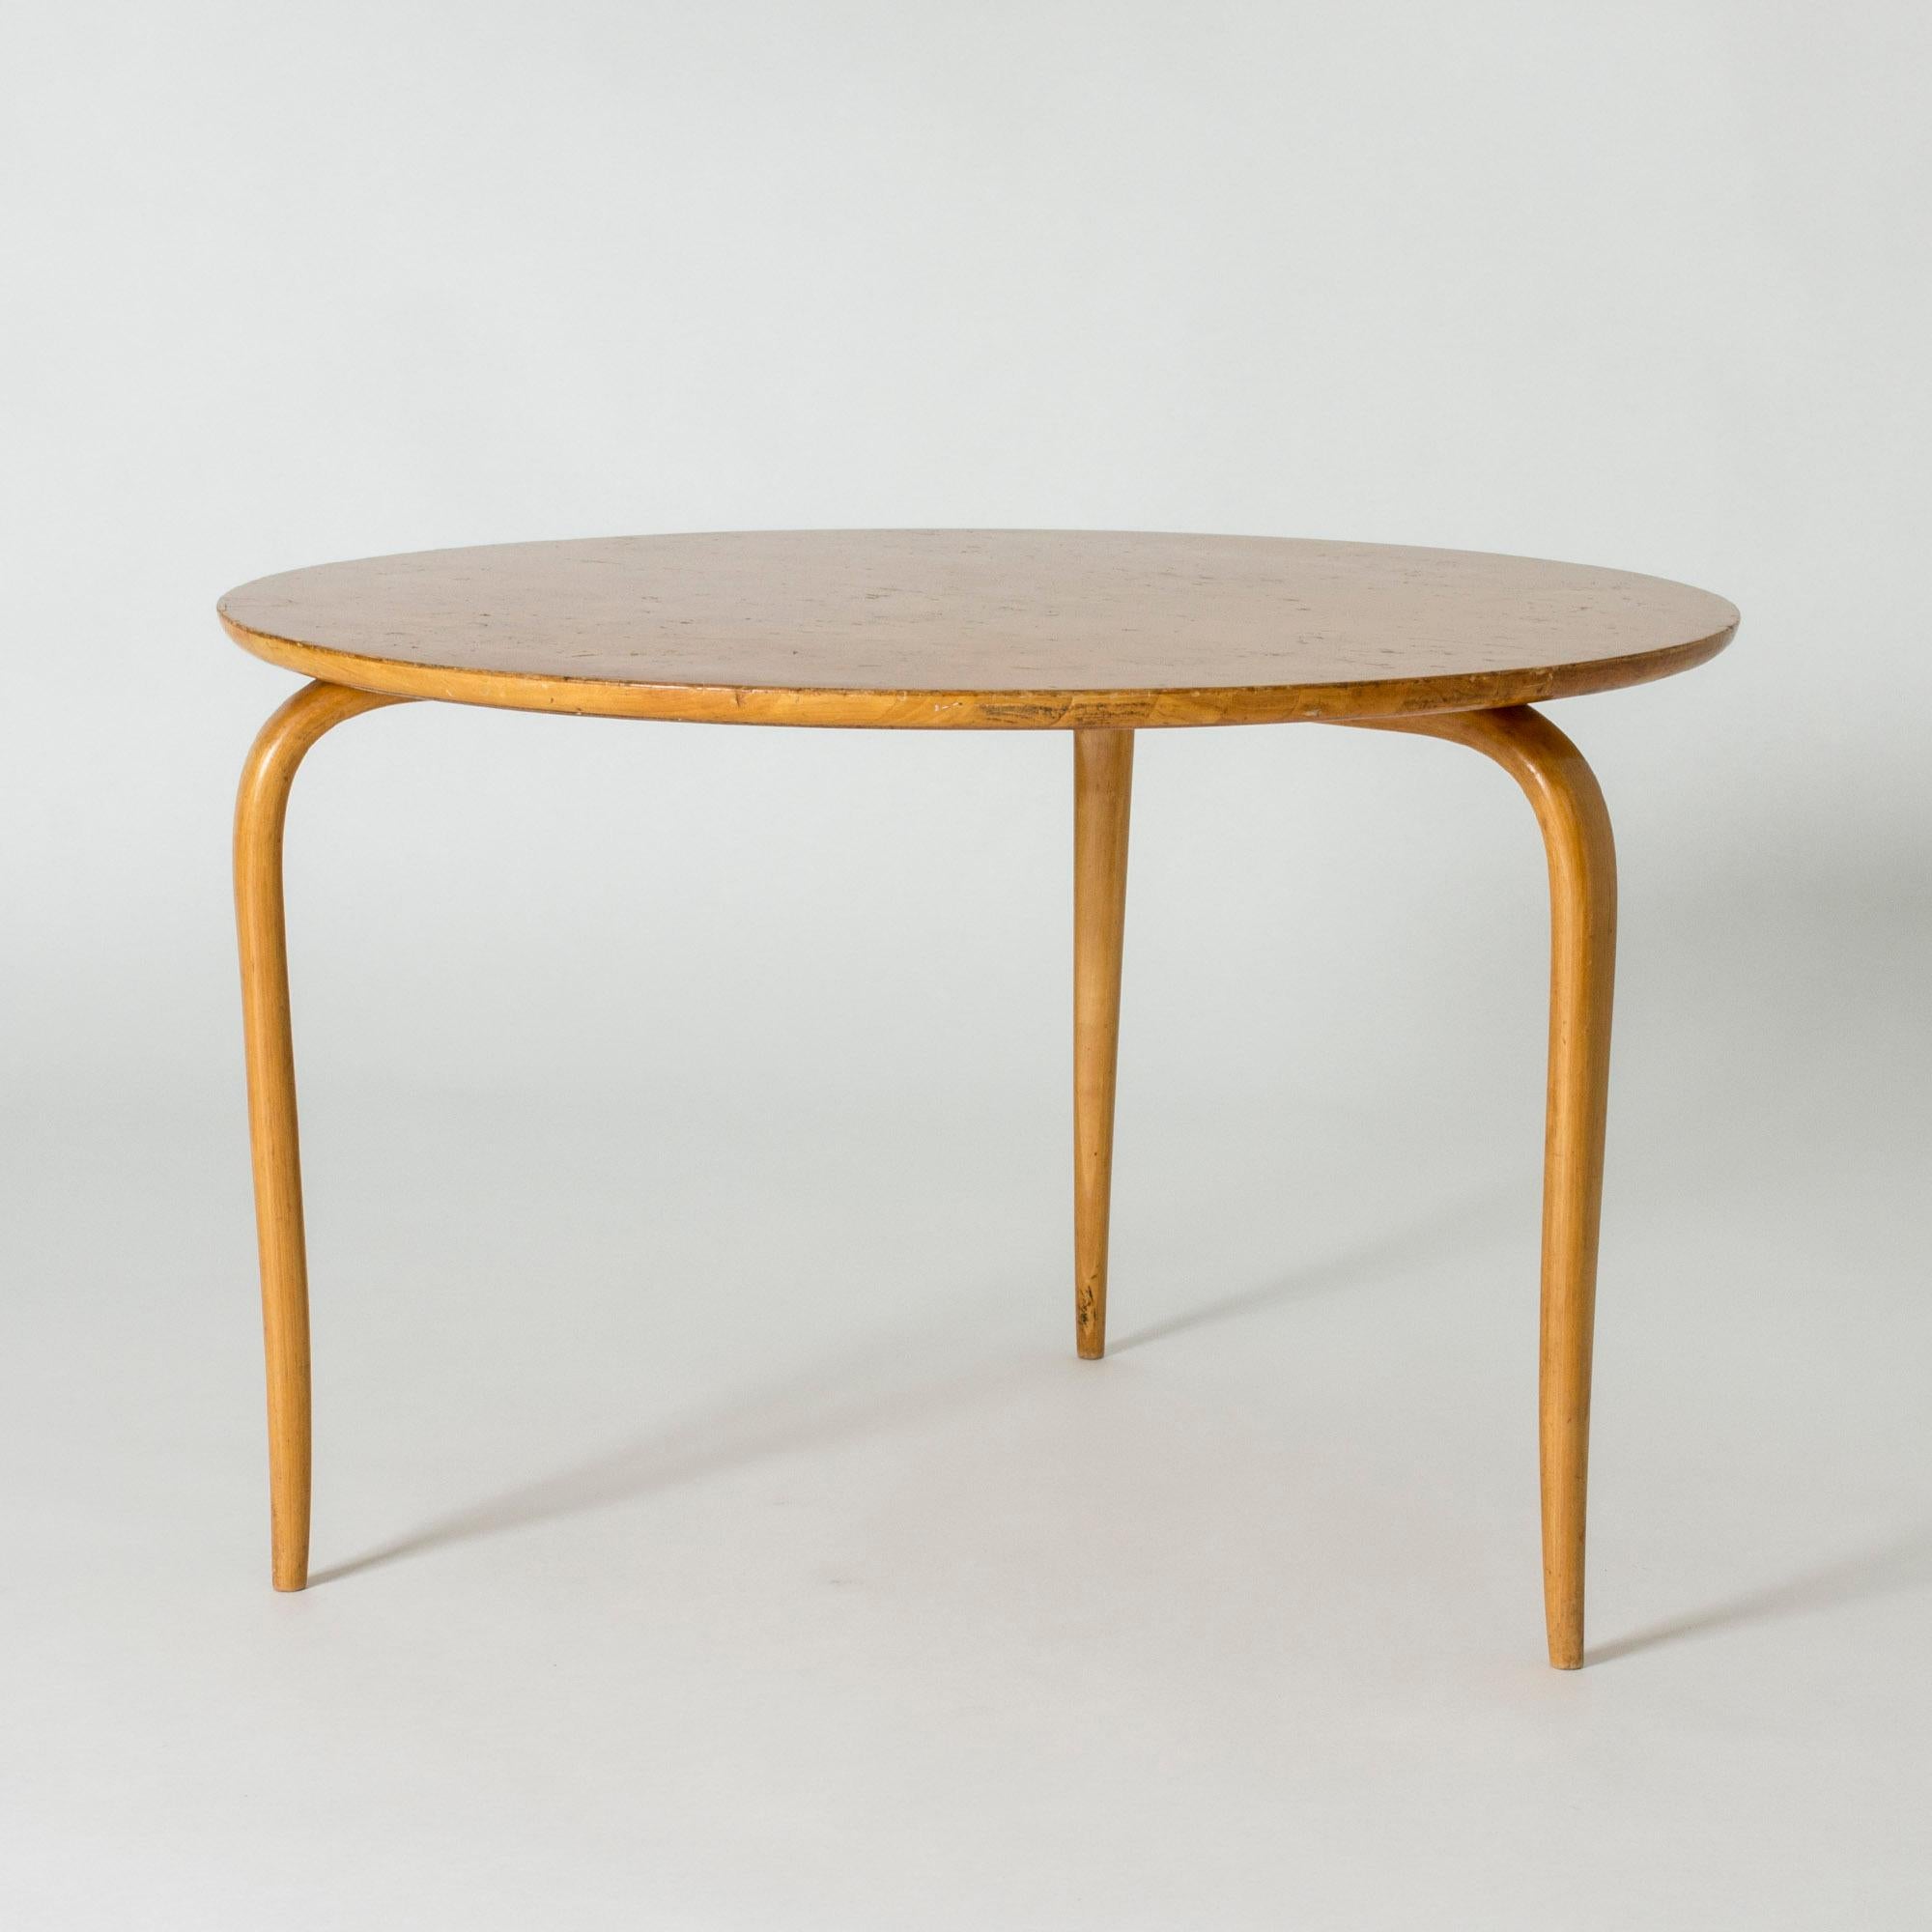 “Annika” coffee table by Bruno Mathsson, made from birch with a round root table top. Beautiful curved legs. This is an early edition made in the 1930s, gracefully aged.